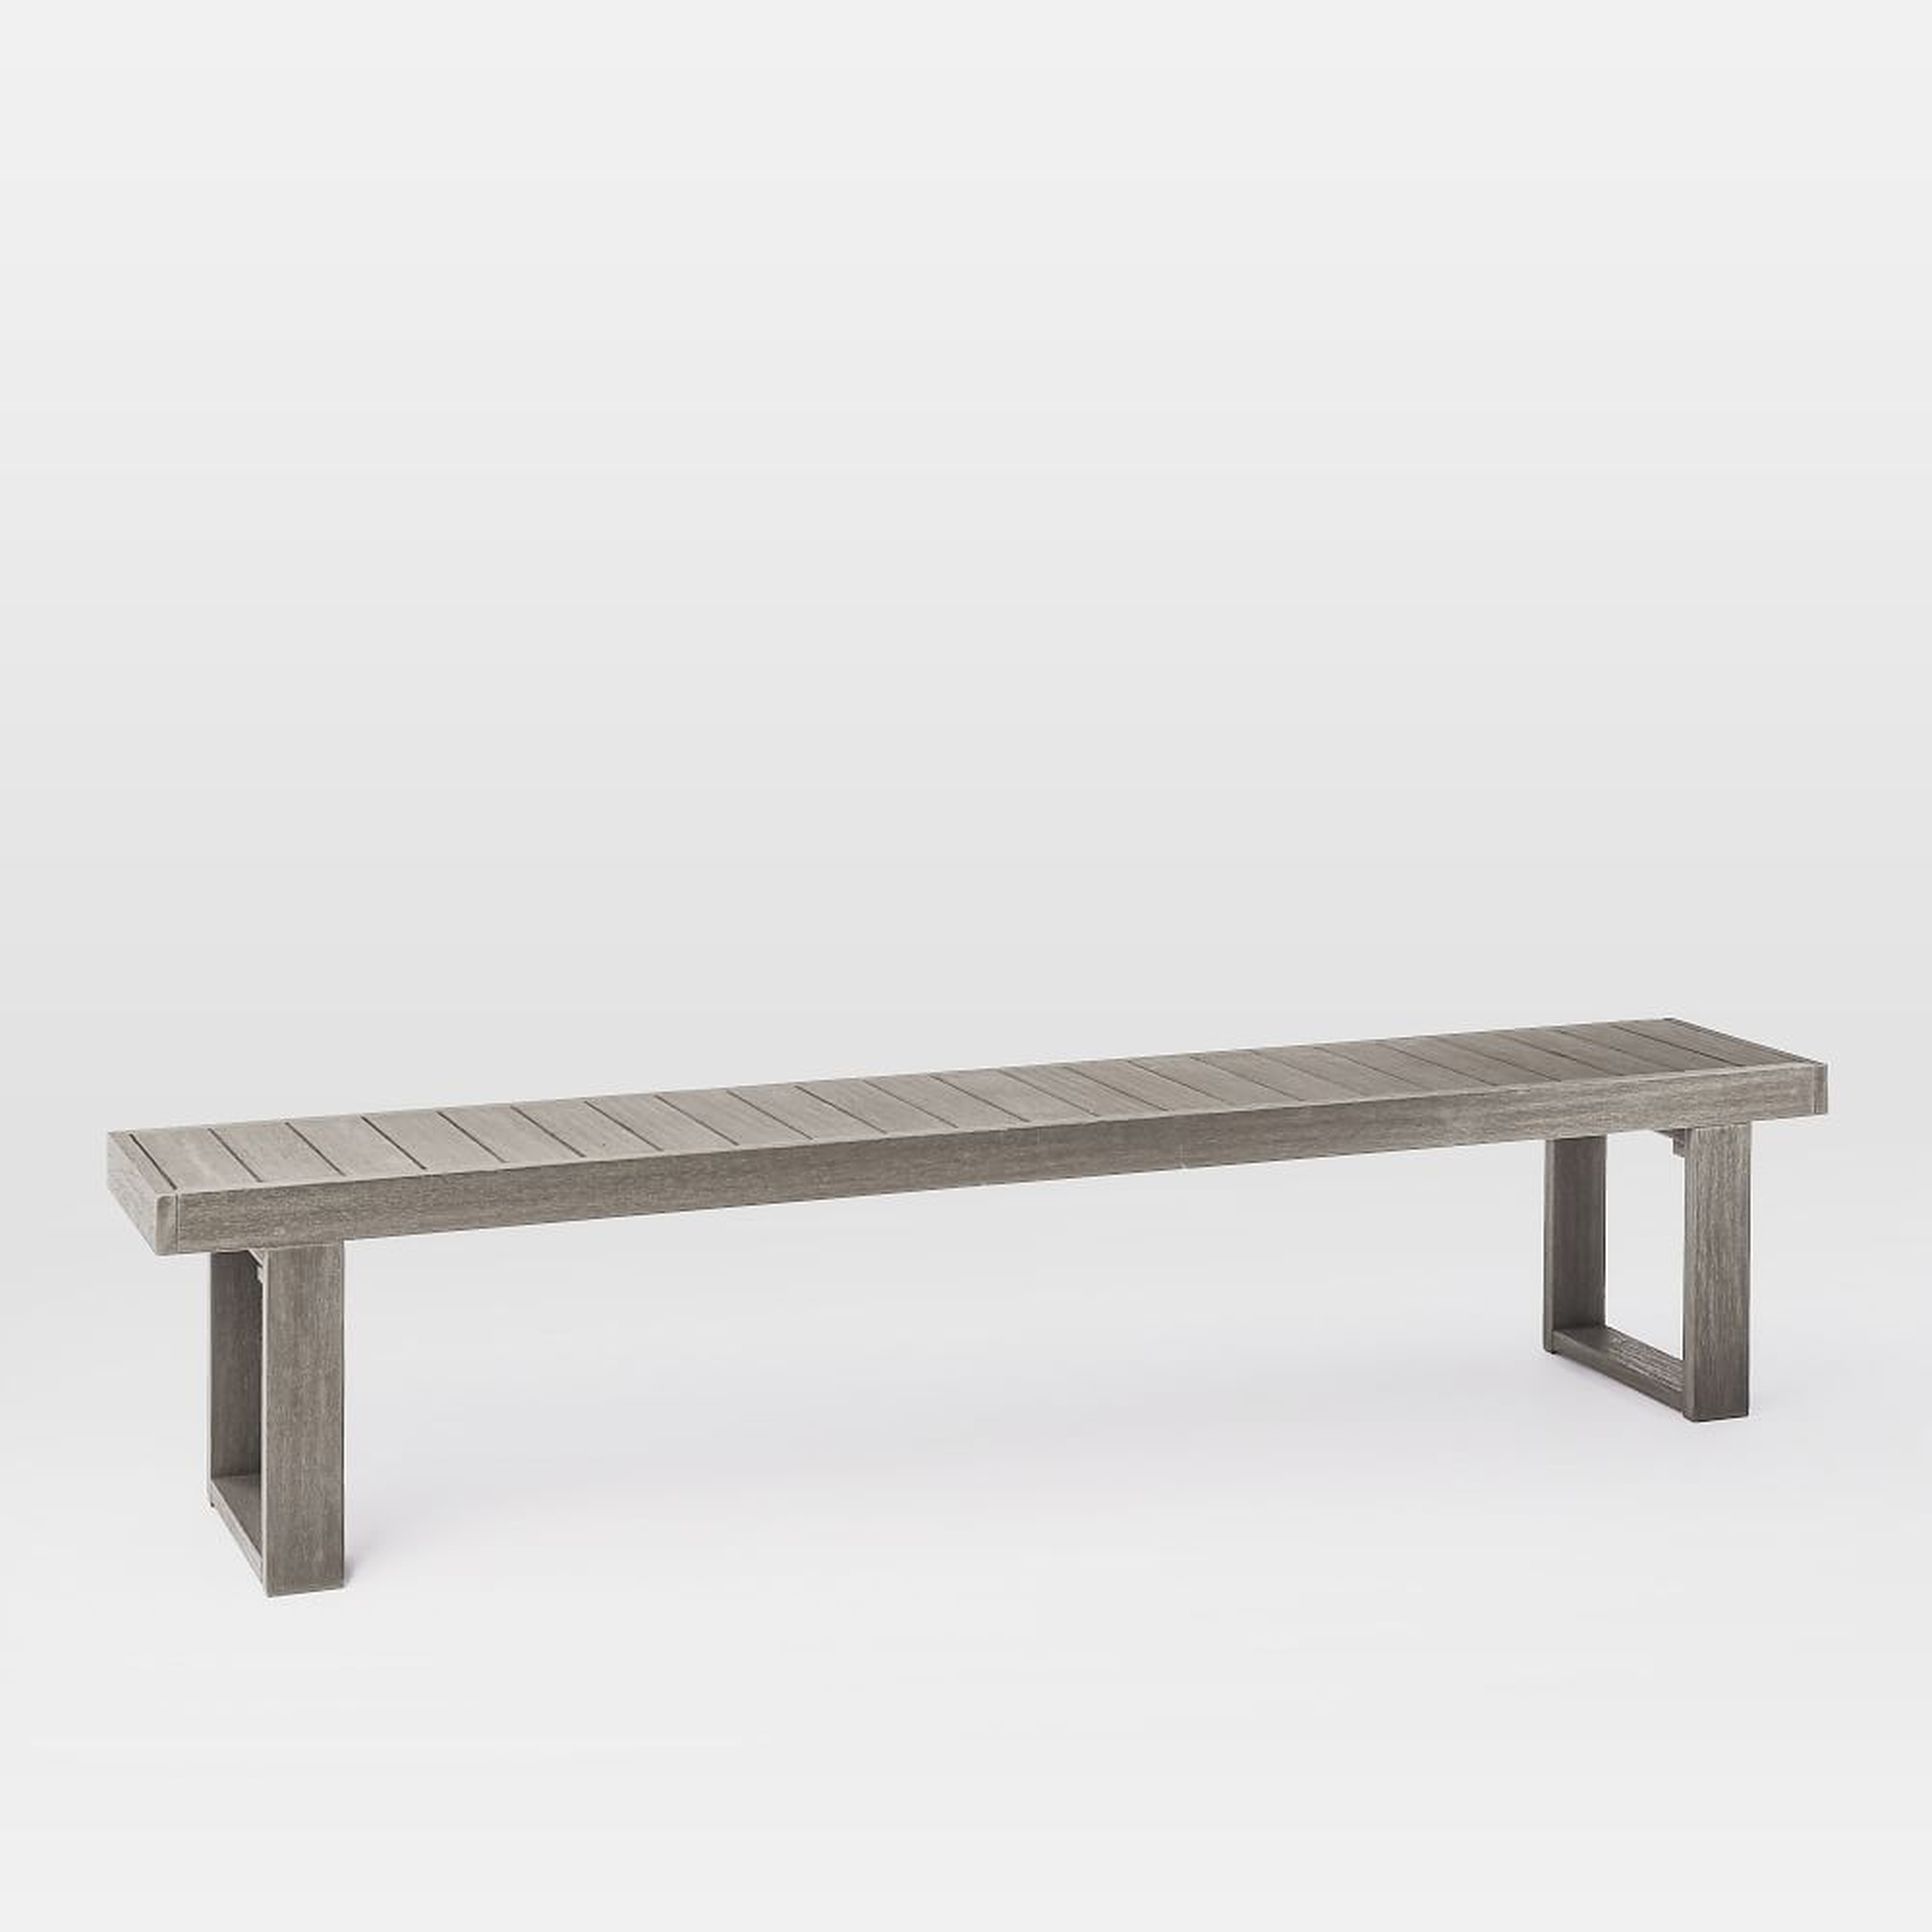 Portside Outdoor Dining Bench, 88.5", Weathered Gray - West Elm